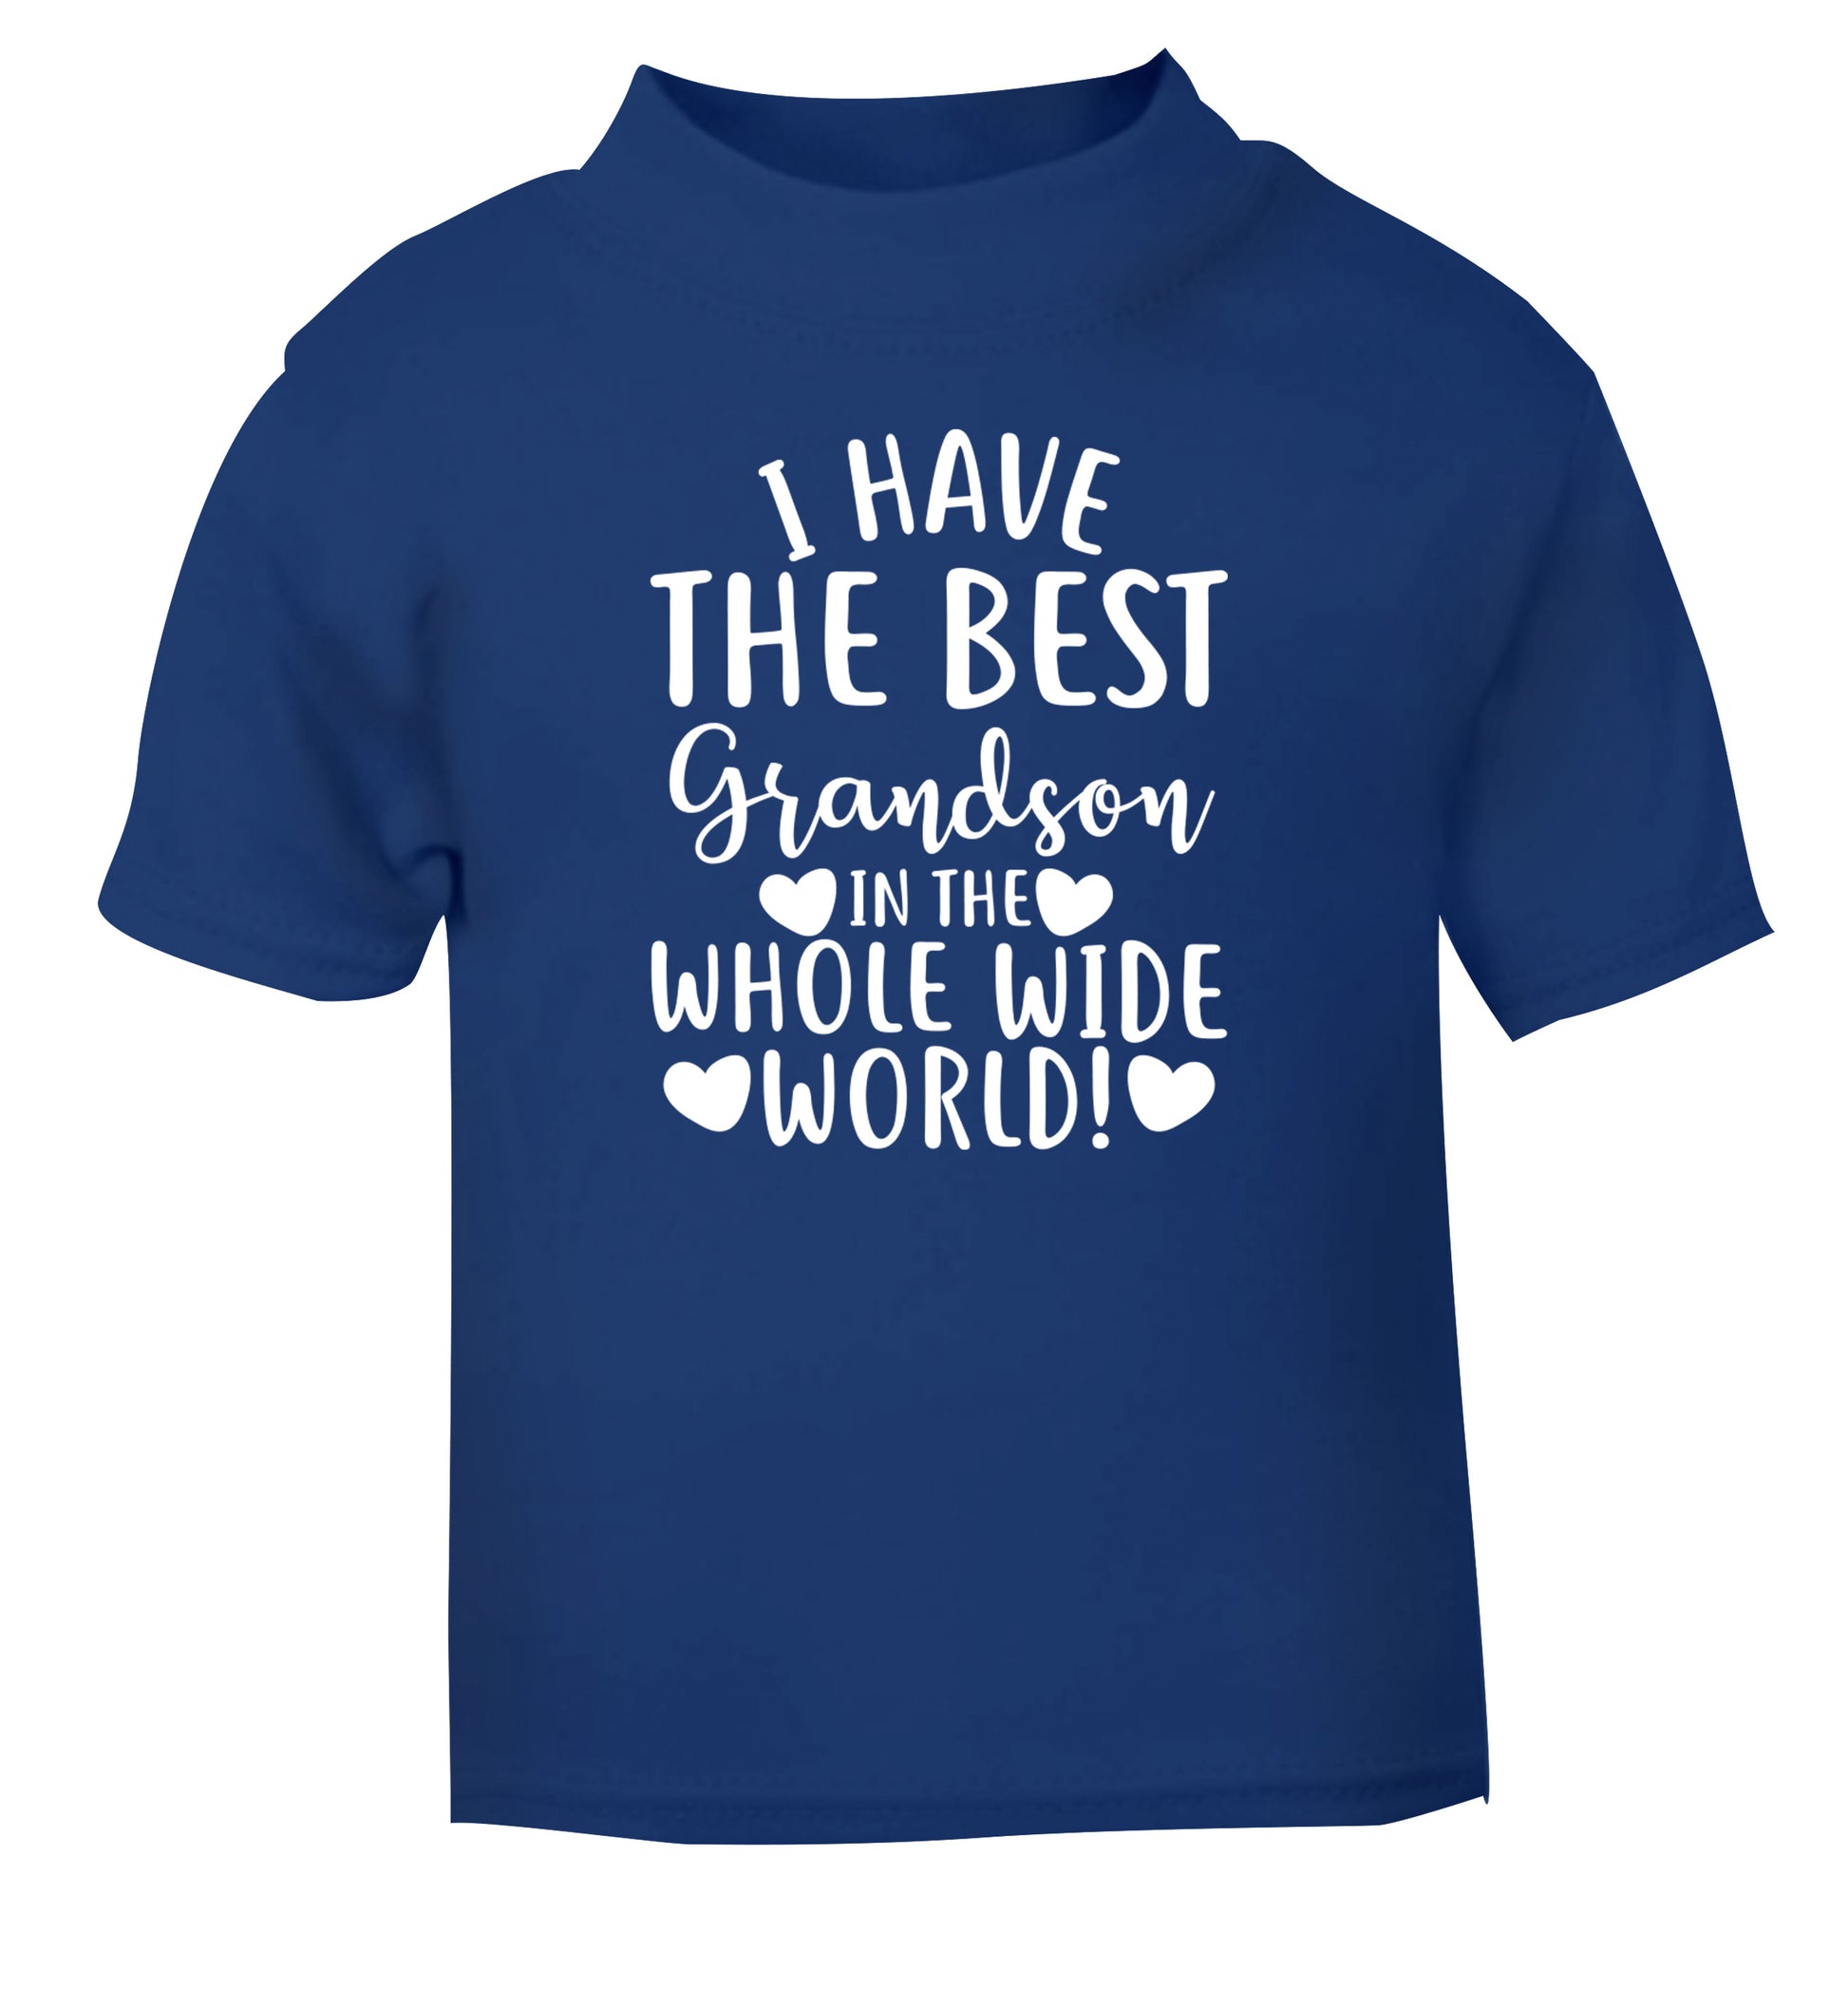 I have the best grandson in the whole wide world! blue Baby Toddler Tshirt 2 Years